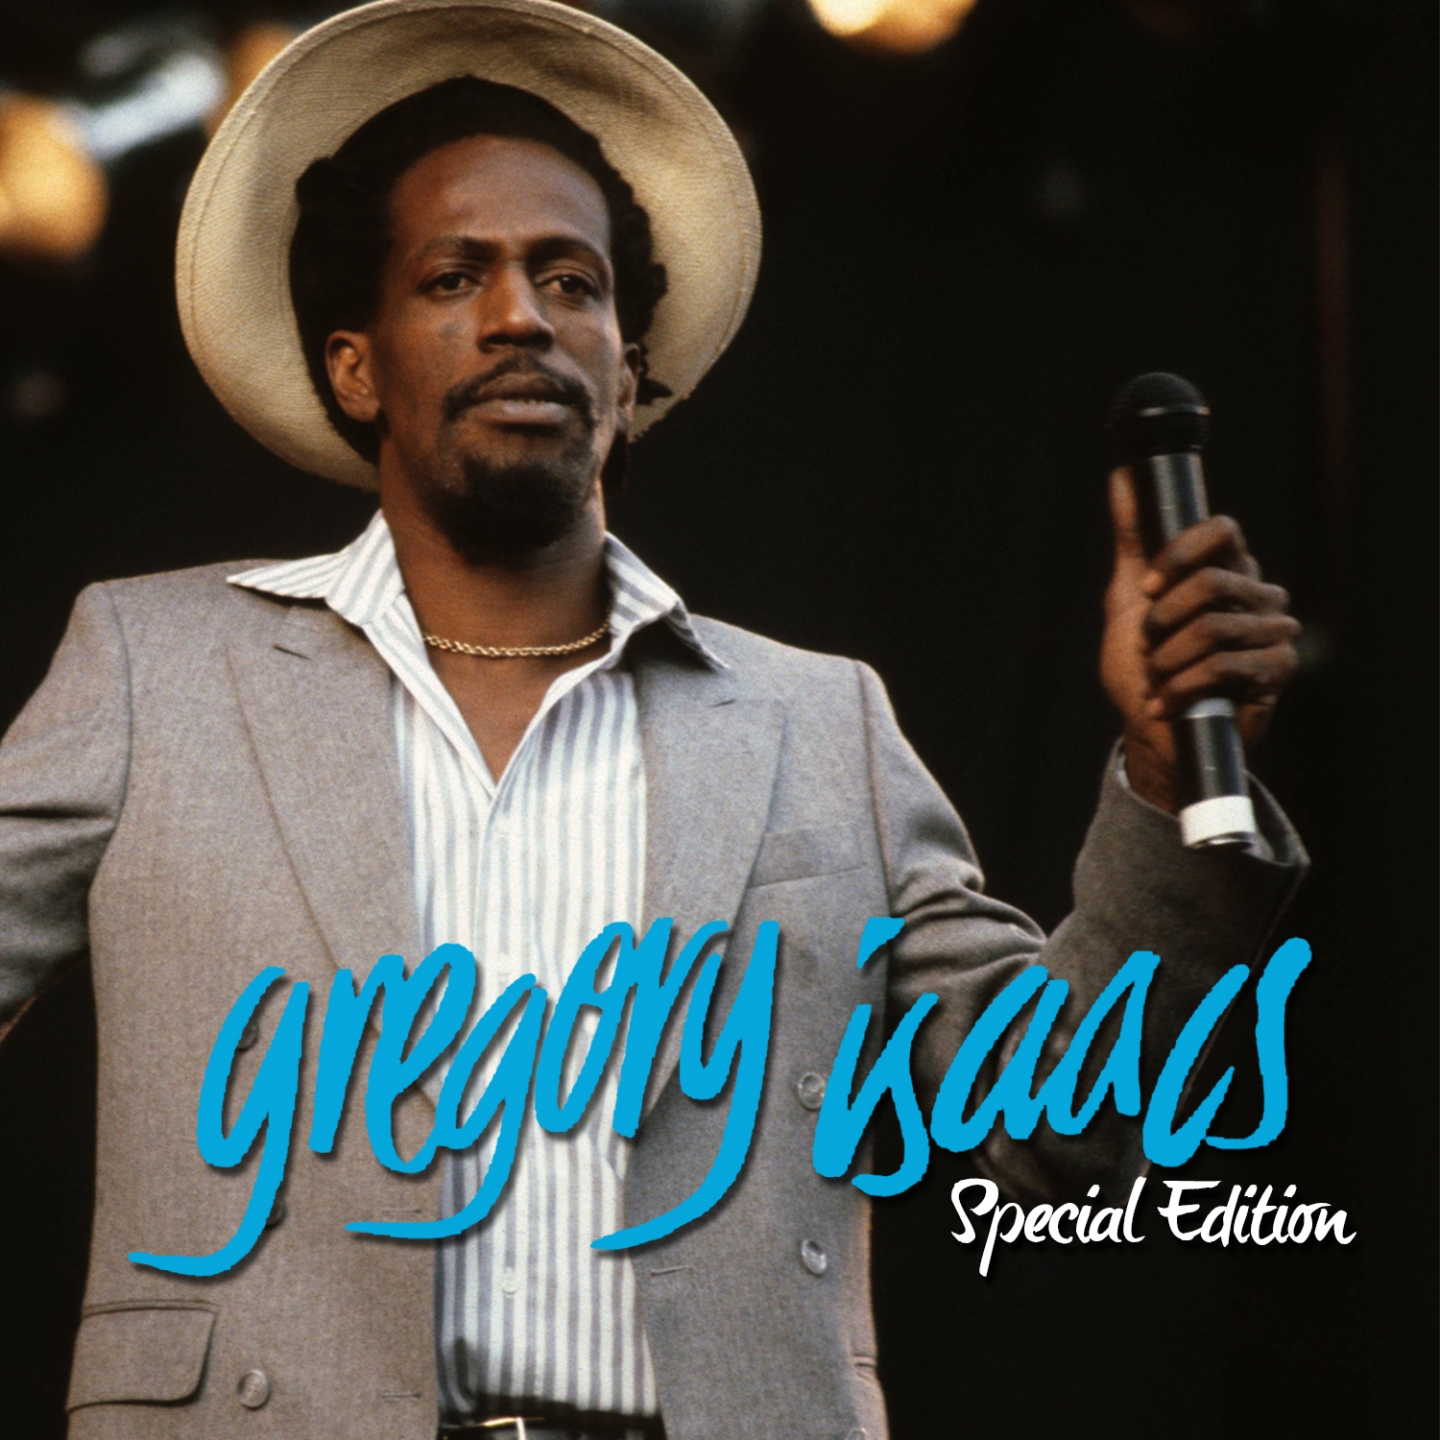 Gregory Isaacs : Special Edition